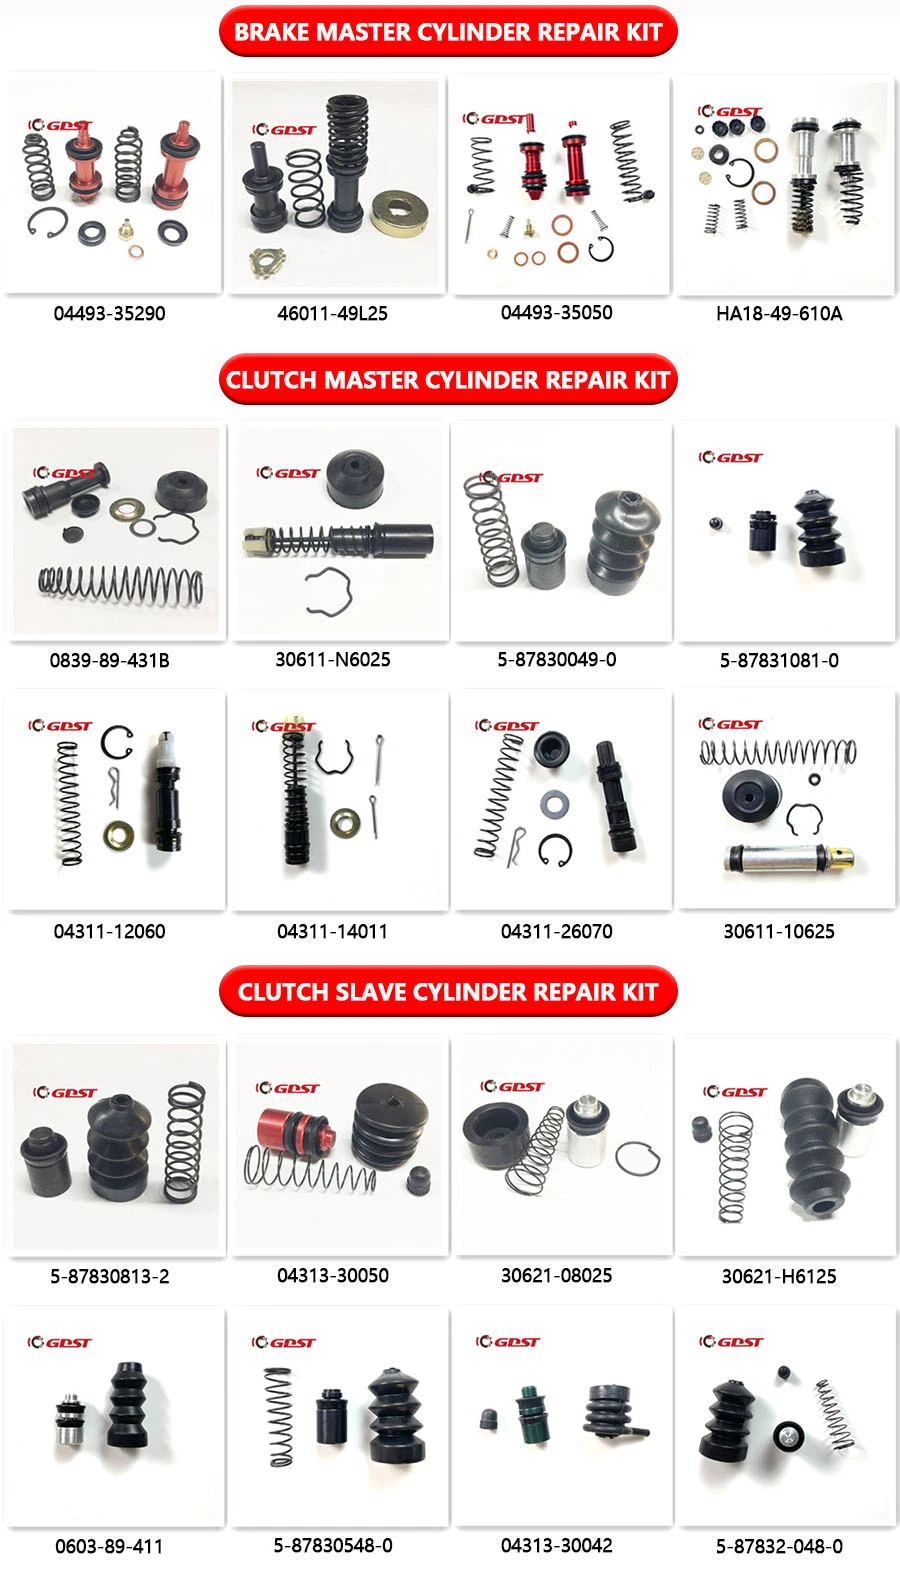 GDST China Manufacturer Auto Transmission System 0603-89-411 060389411 Clutch Master Cylinder Repair Kits for Toyota